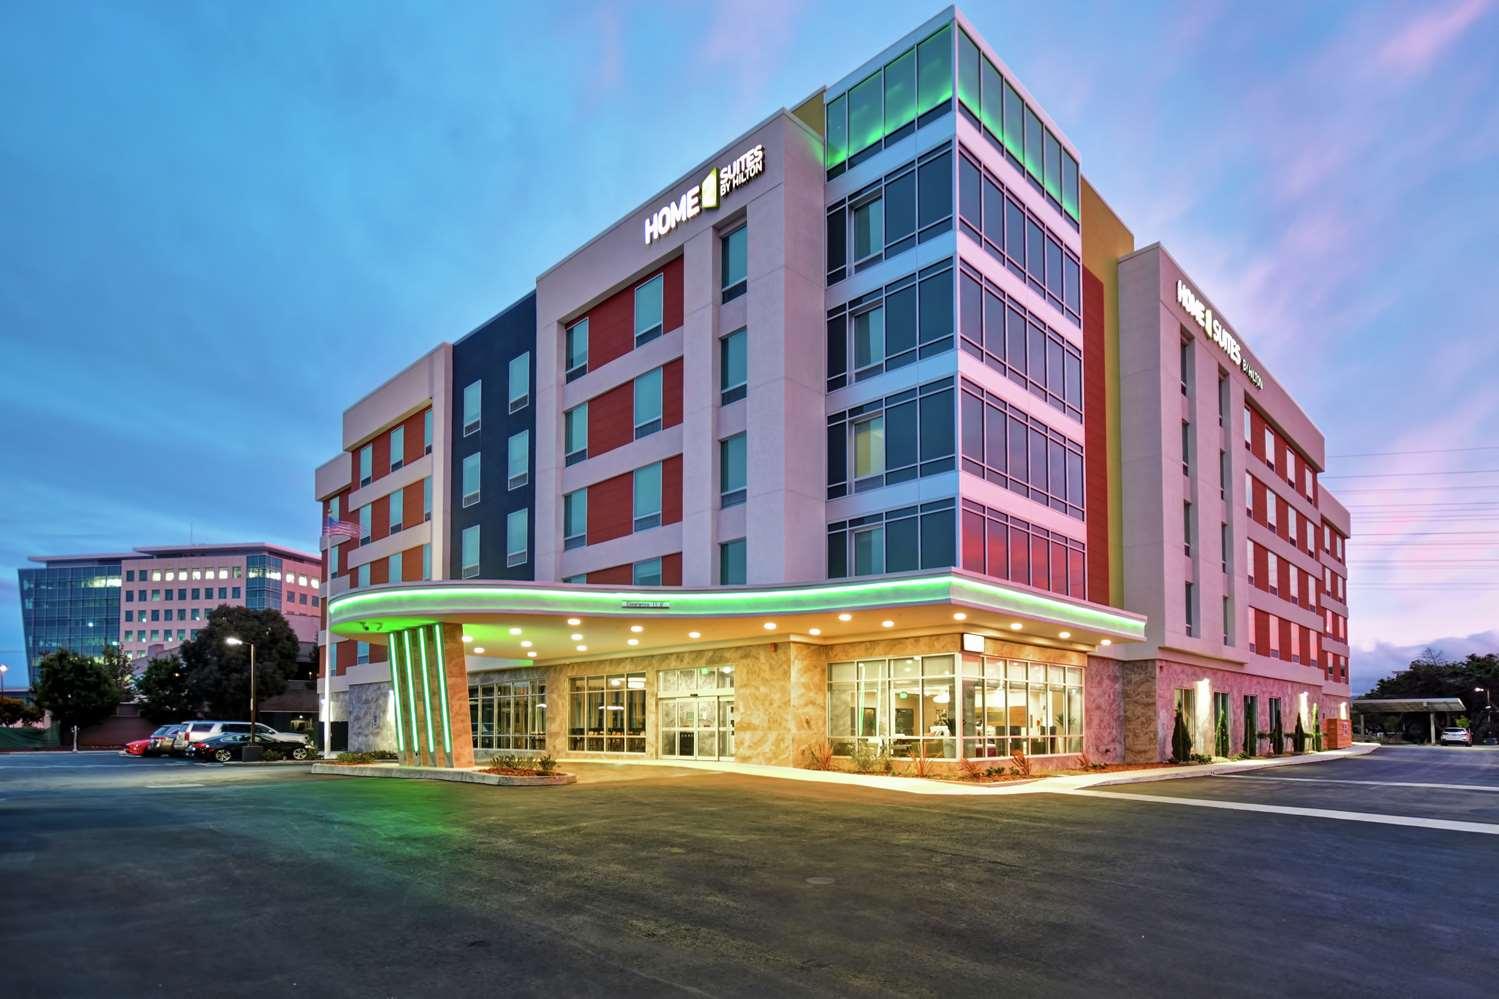 Home2 Suites by Hilton San Francisco Airport North in South San Francisco, CA